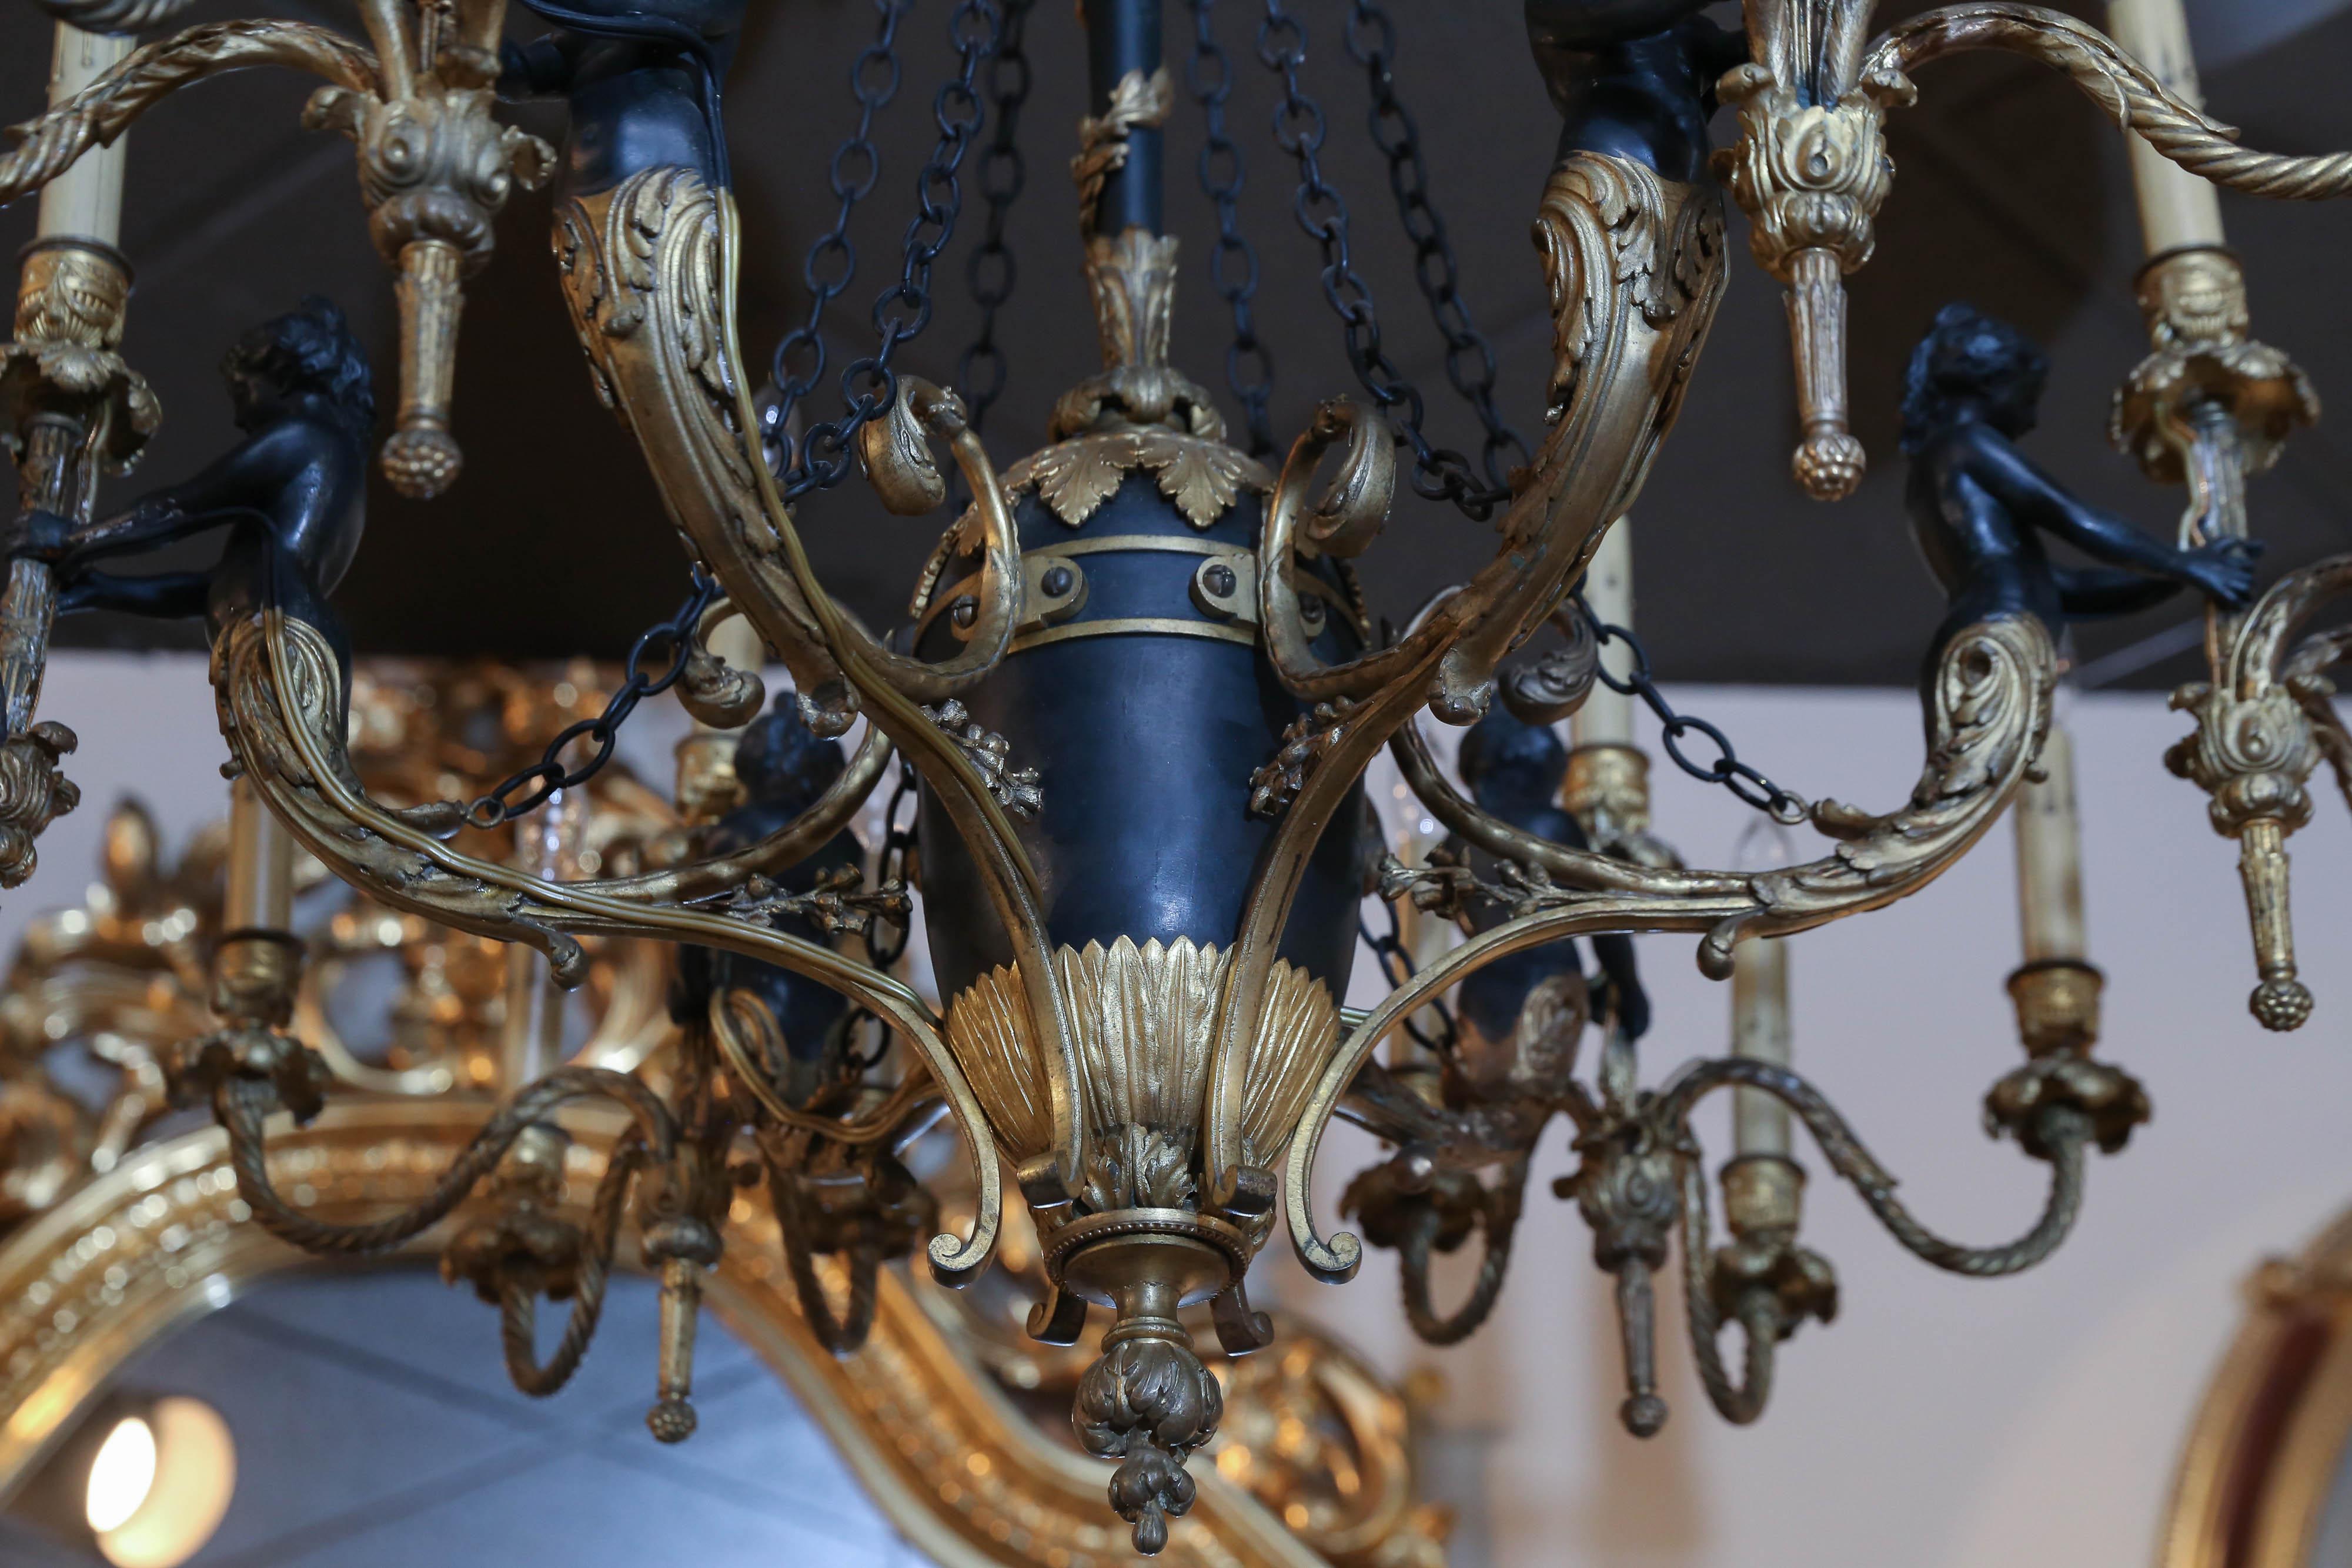 Empire style chandelier with 24 lights, six scrolled arms each
Supporting 4 lights each. Good wiring and in good working
Condition.